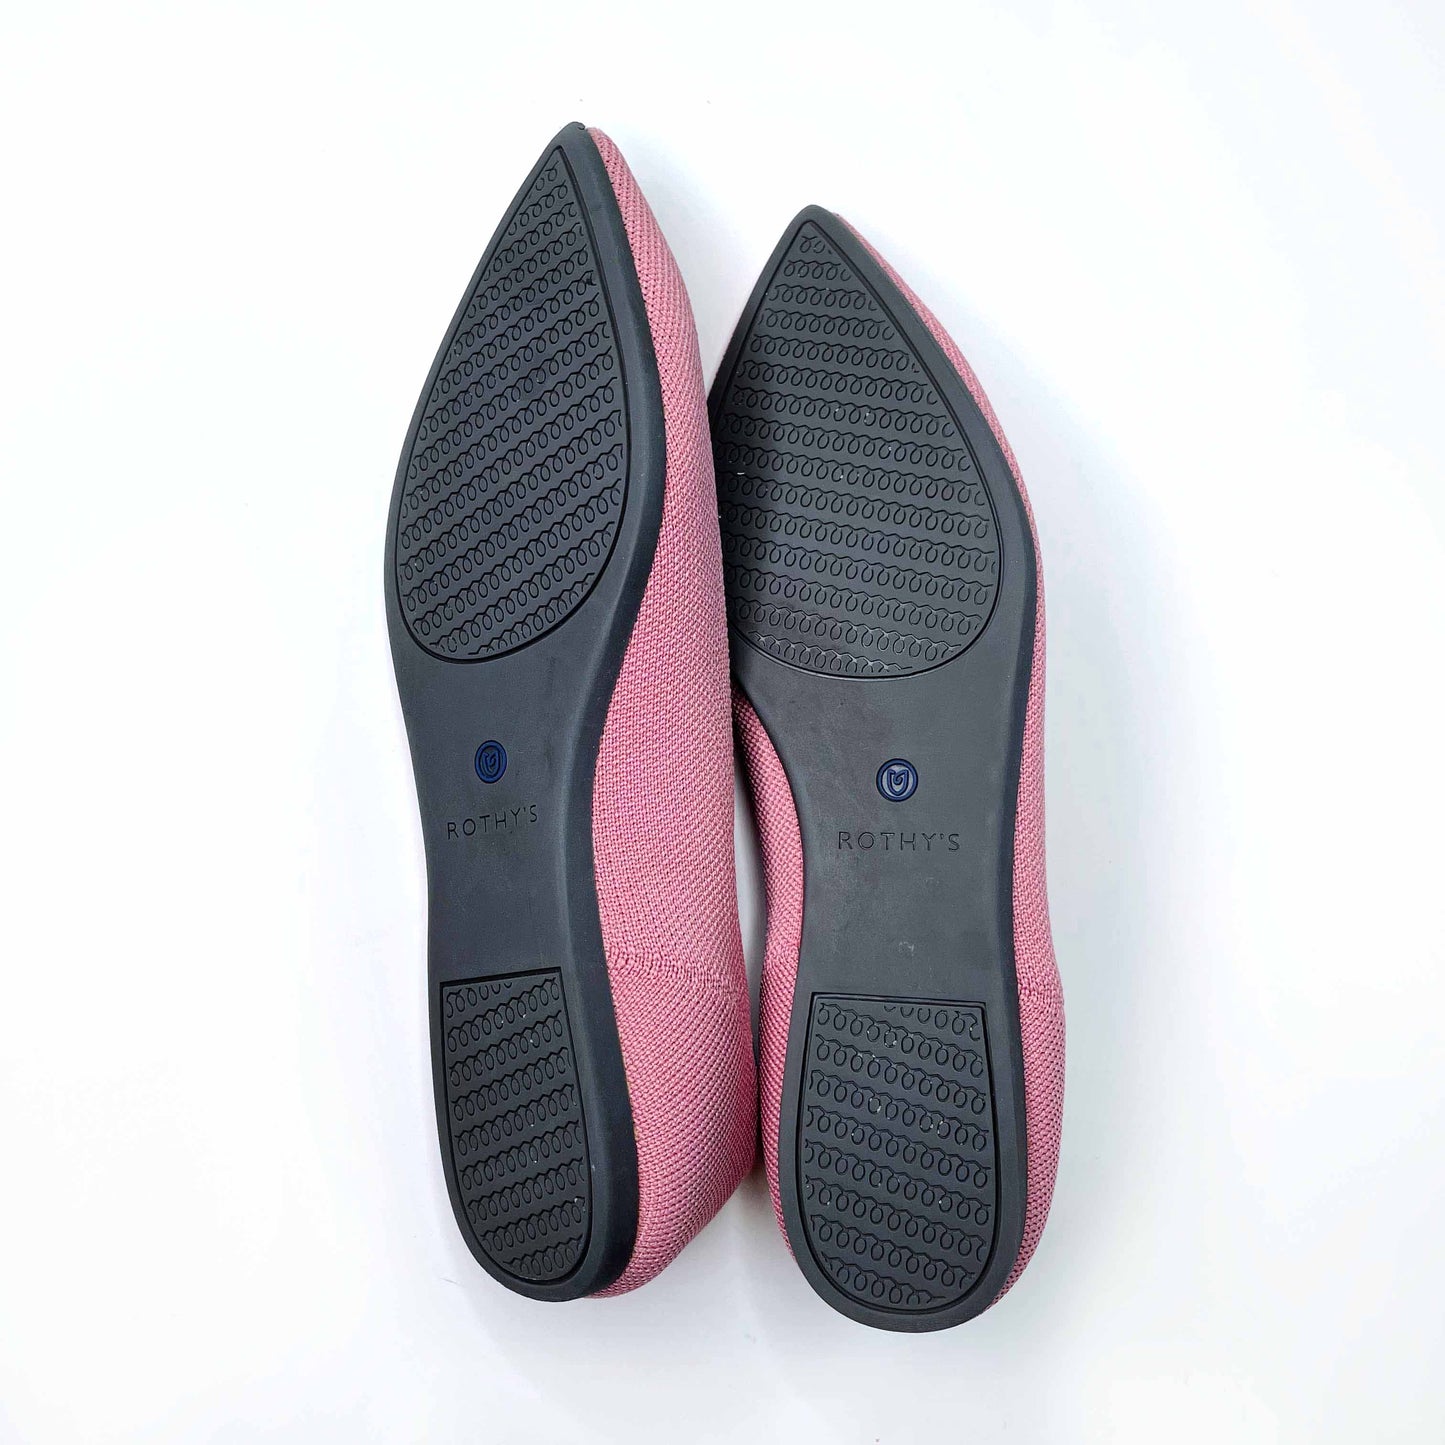 rothy's the point flat shoes in rosebud - size 8.5